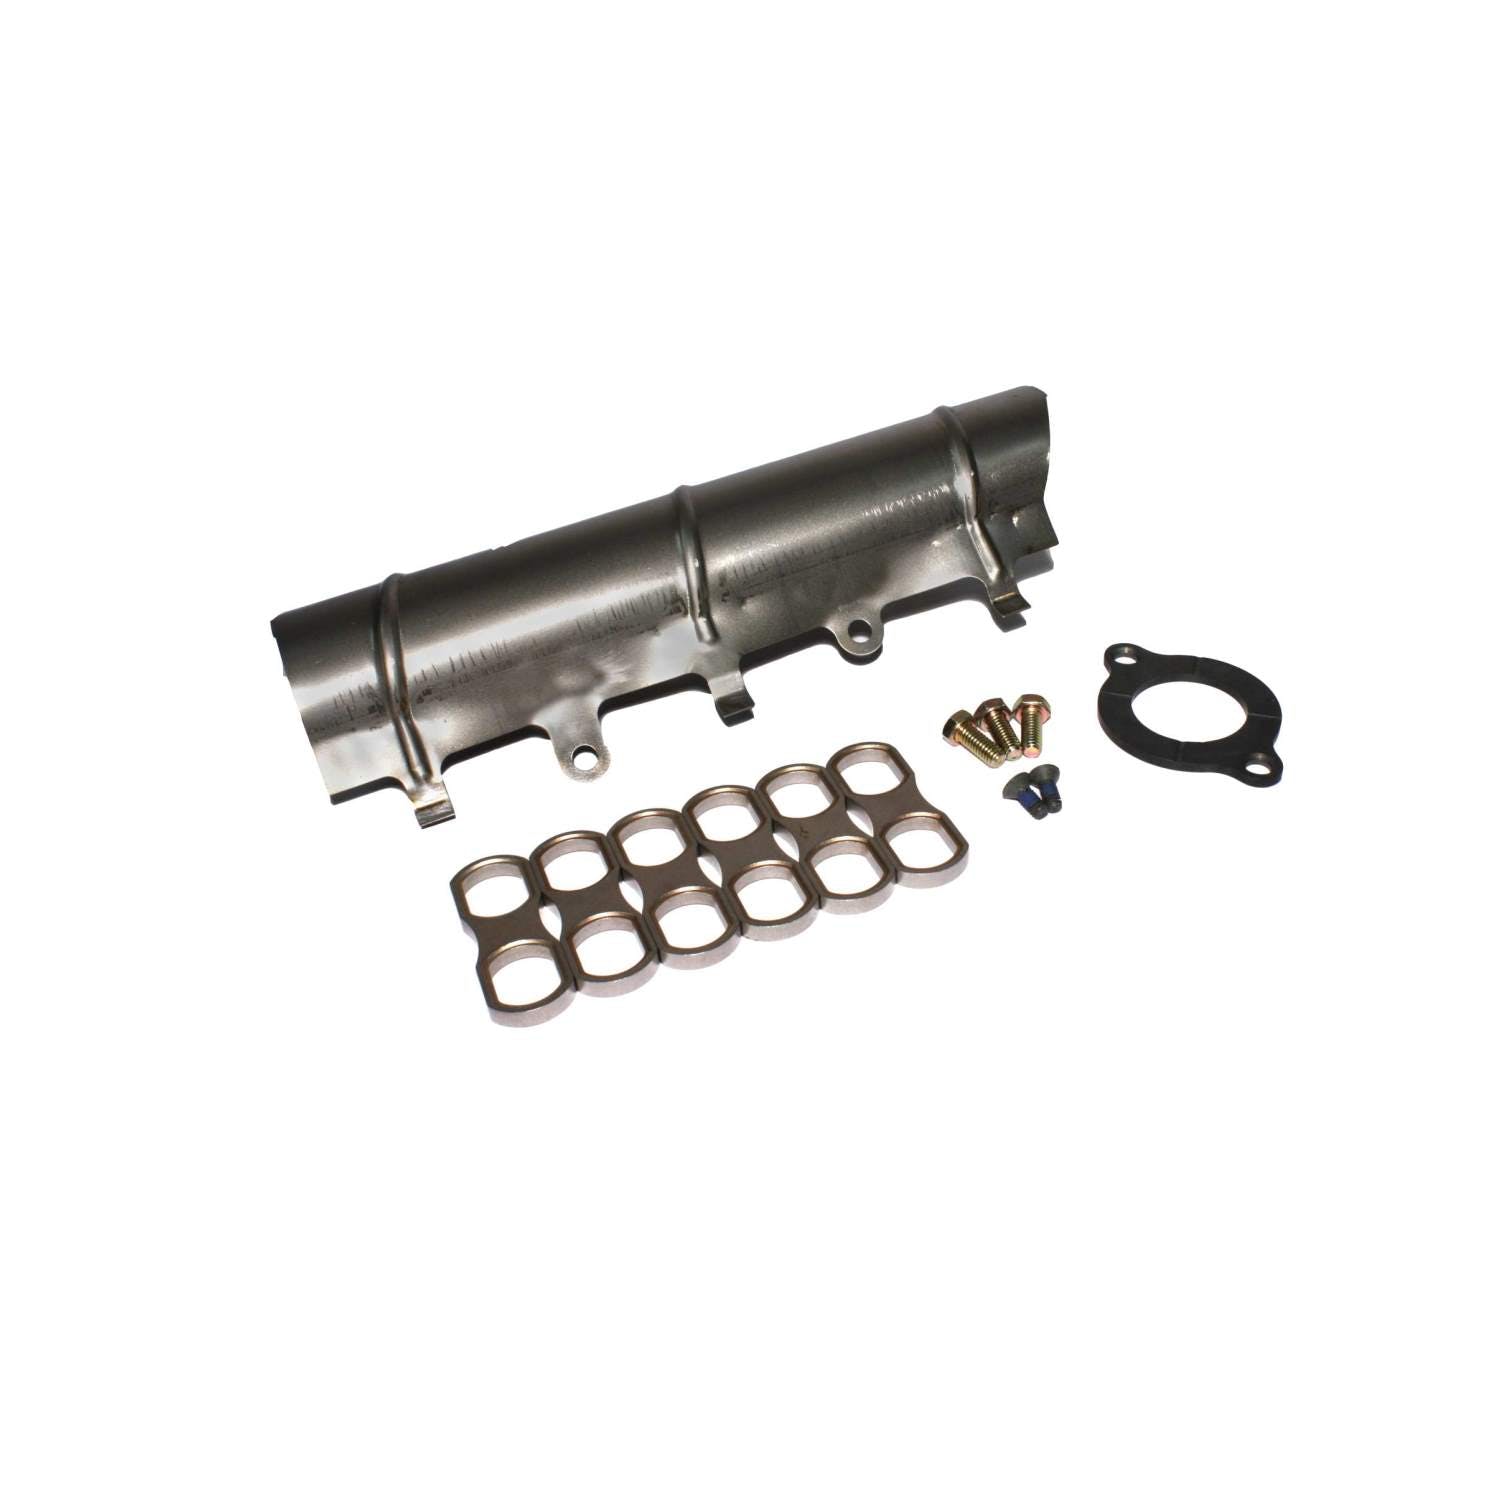 Competition Cams 09-1000 Hydraulic Roller Lifter Installation Kit